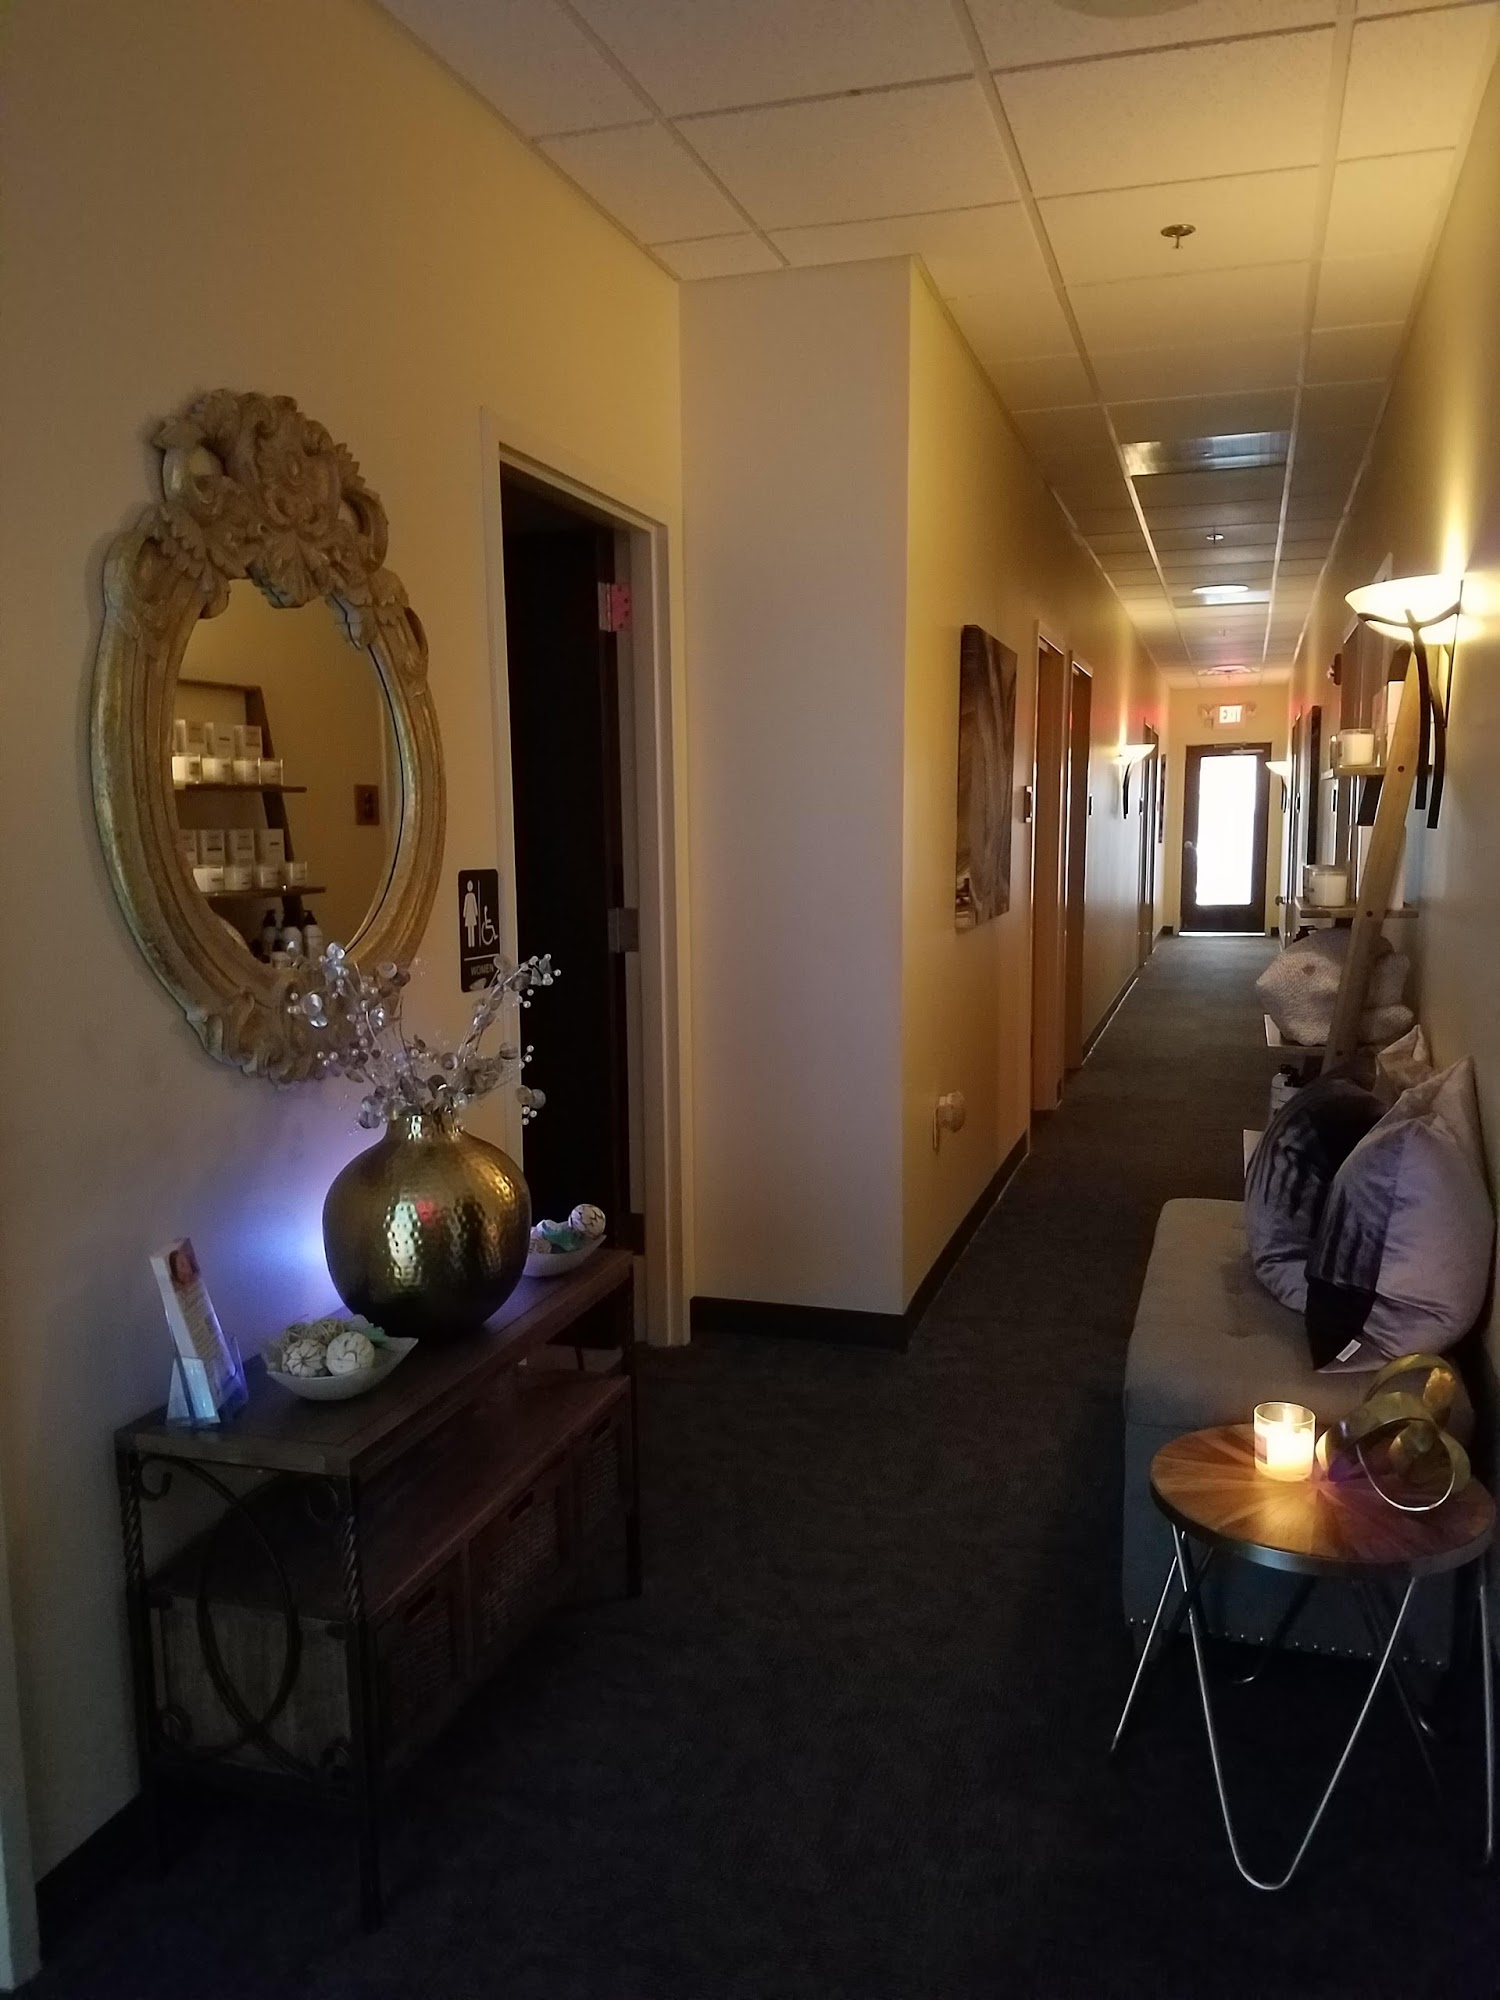 Hand and Stone Massage and Facial Spa 39 W Allendale Ave, Allendale New Jersey 07401